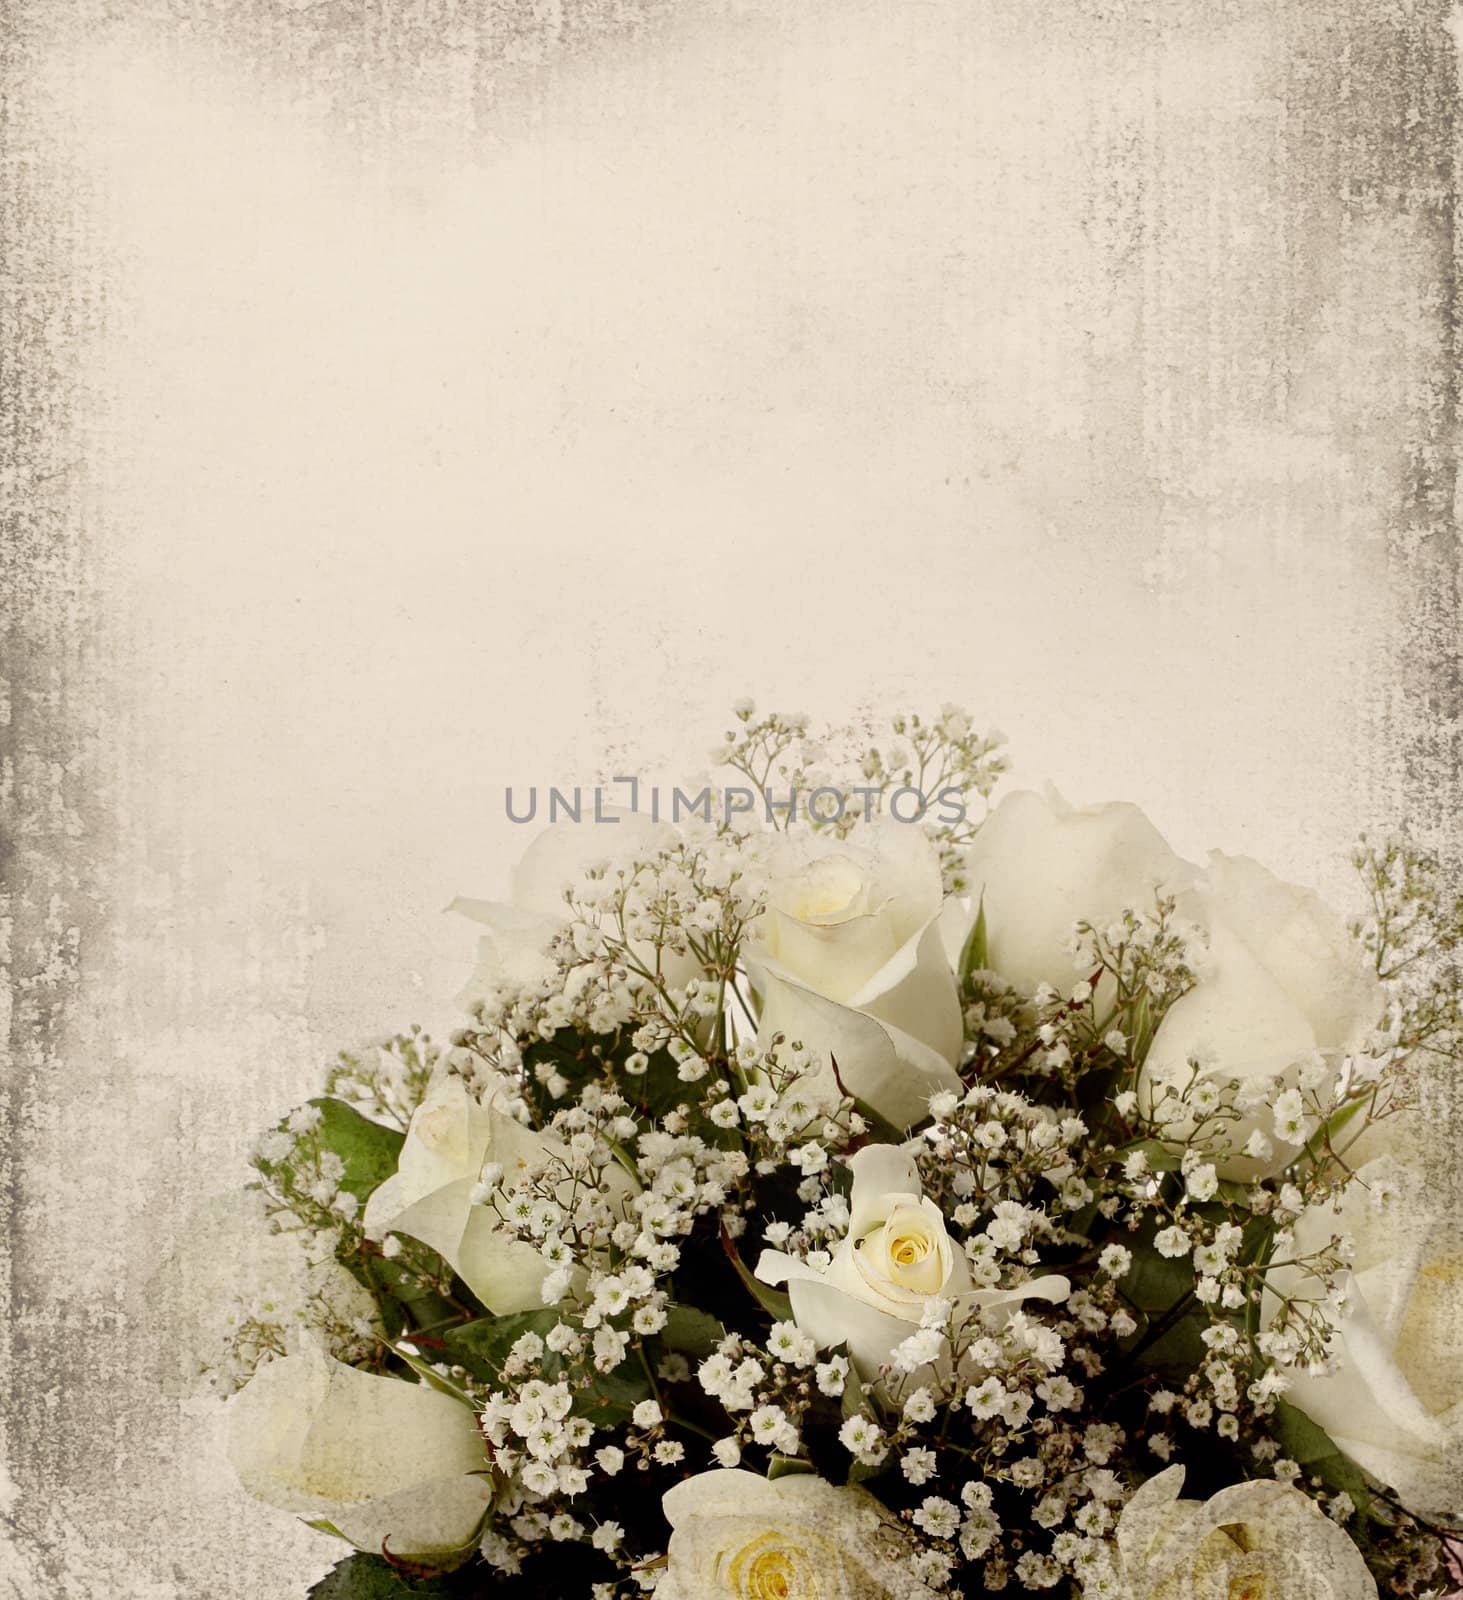 grunge textured card with roses